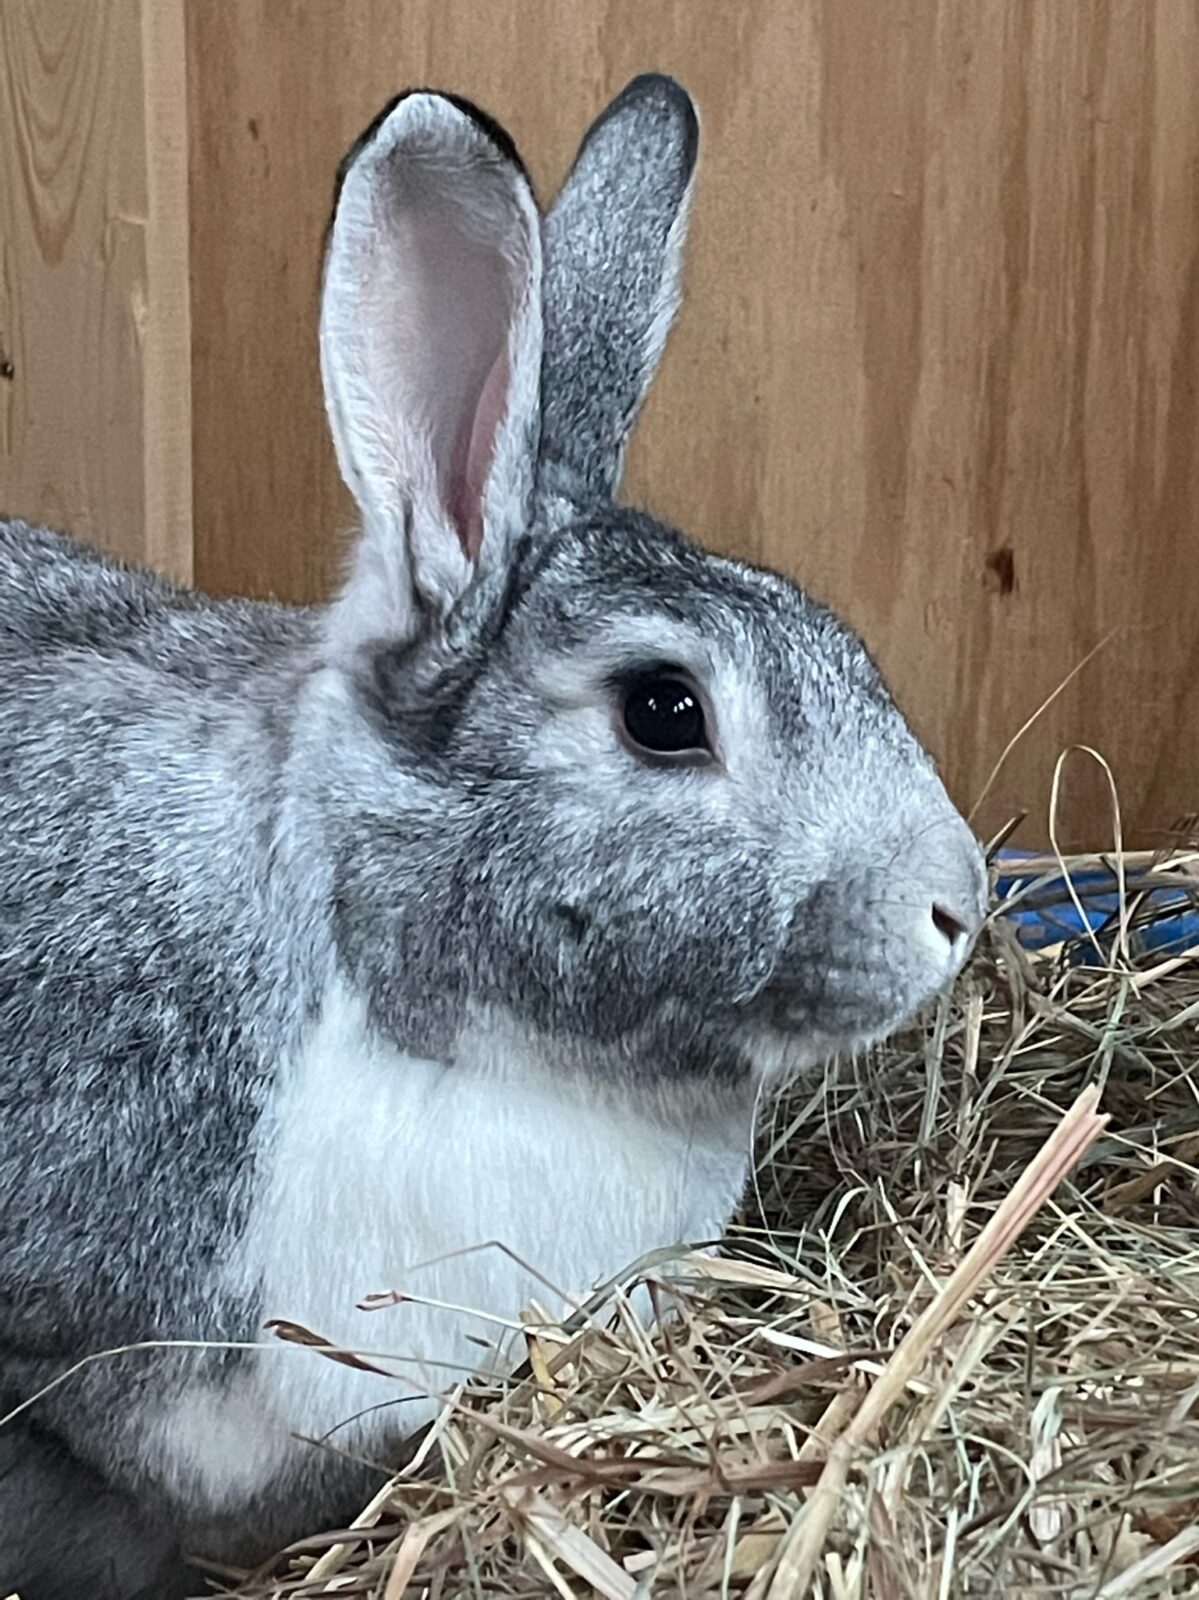 Clarabelle Cottontail the gray and white rabbit